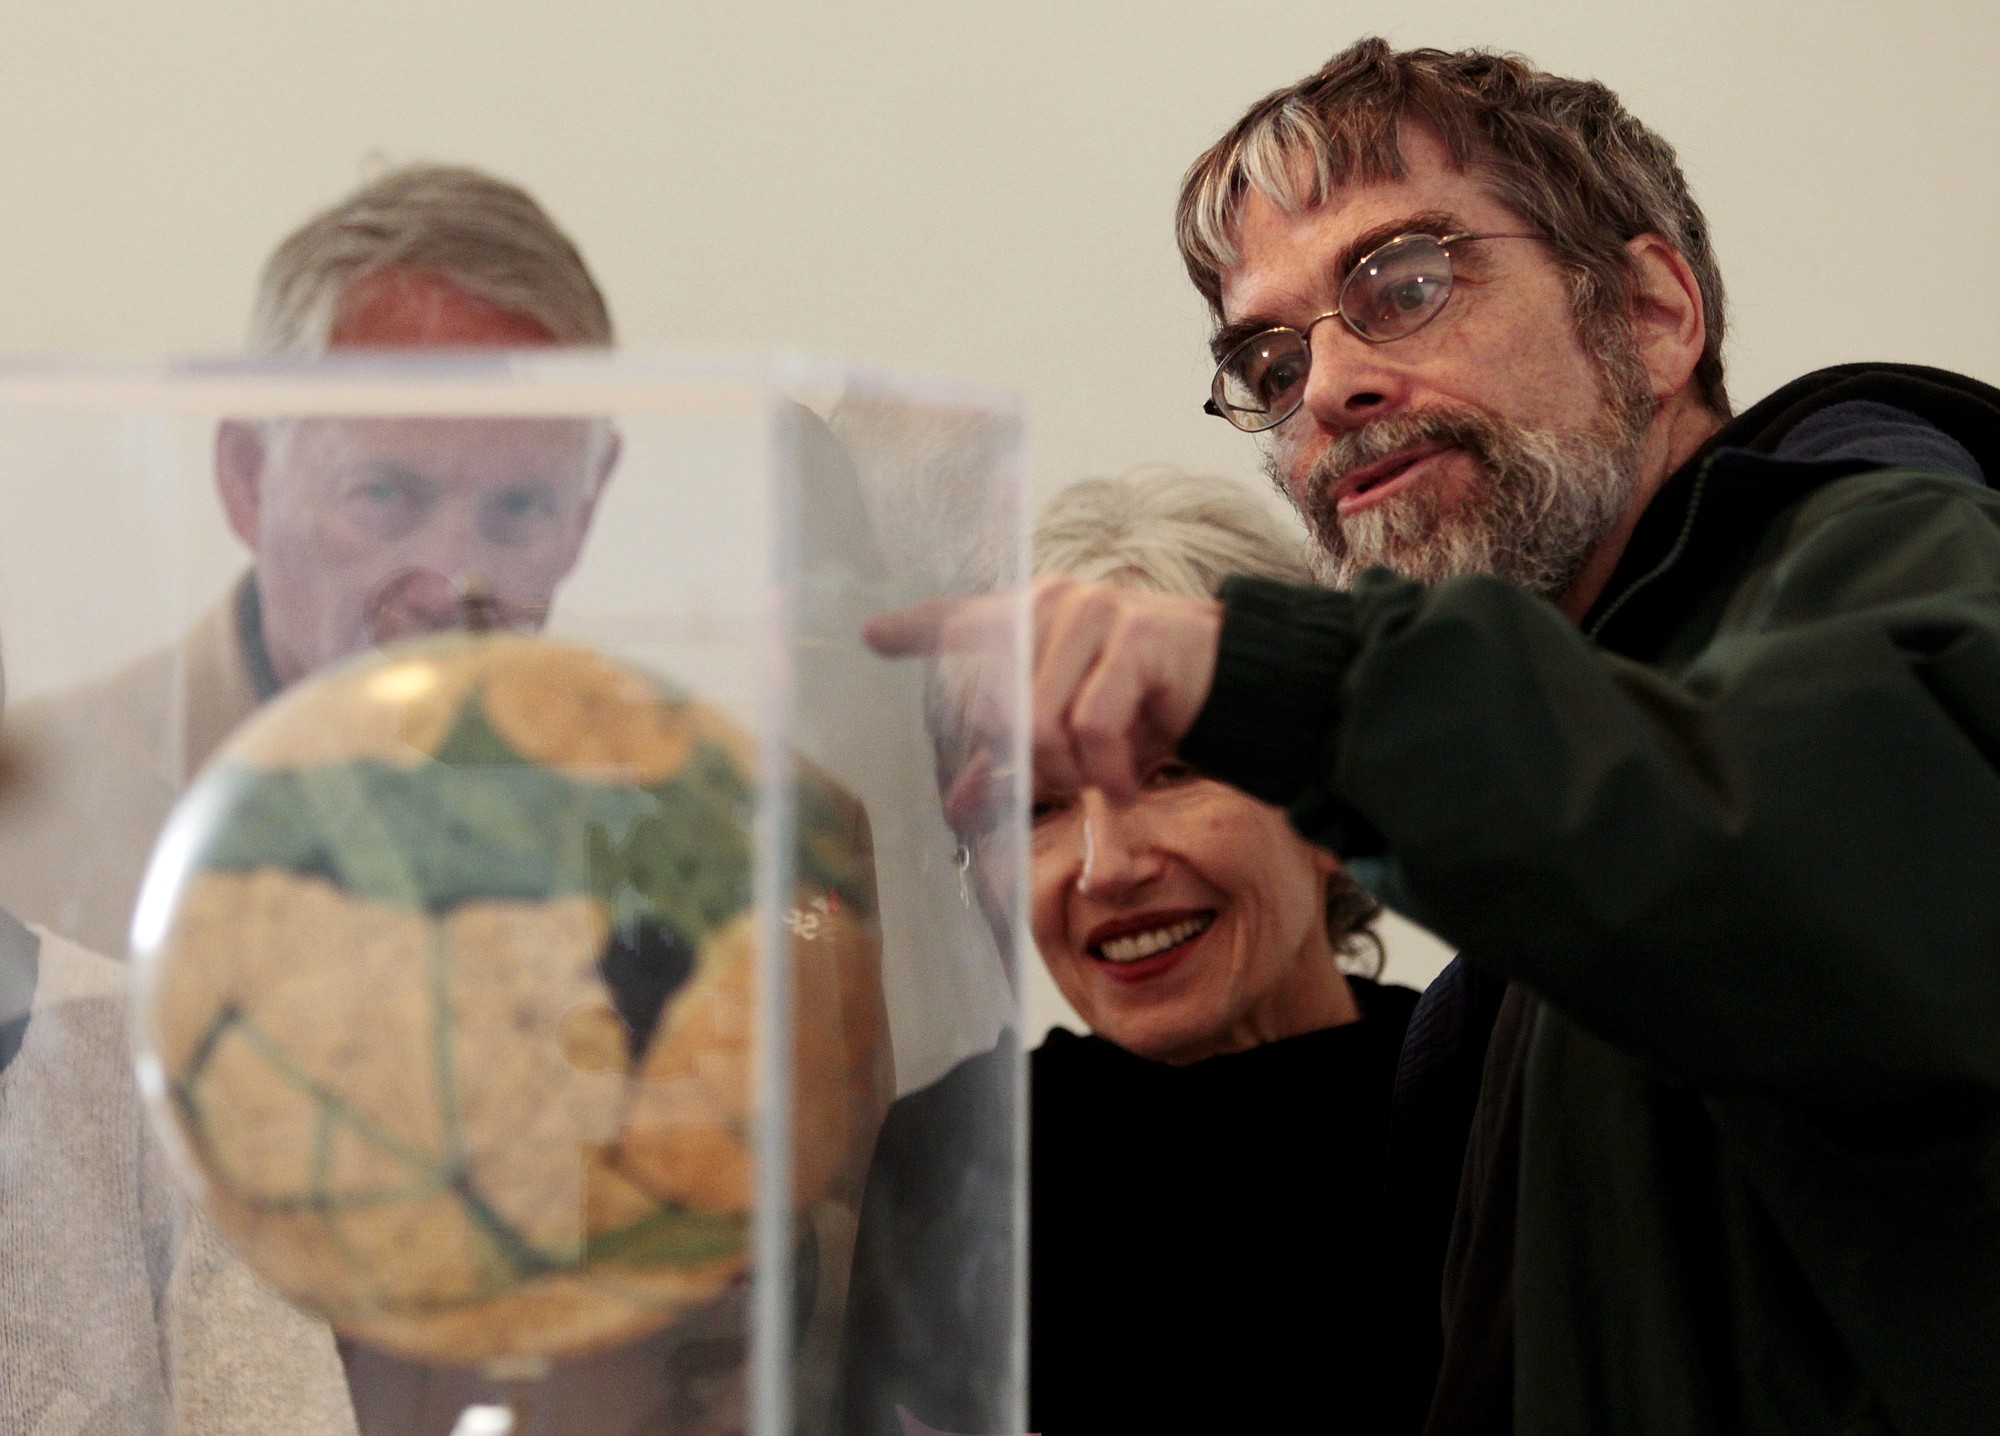 Associated Press files
Brother Guy Consolmagno, a Jesuit astronomer at the Vatican's Observatory, right, shows to visitors the Globe of planet Mars from the collection of the Specola Vaticana during an exhibition celebrating the 400th anniversary of demonstration of Galileo's telescope April 15 on the Gianicolo hill, at Rome's American Academy in Rome.